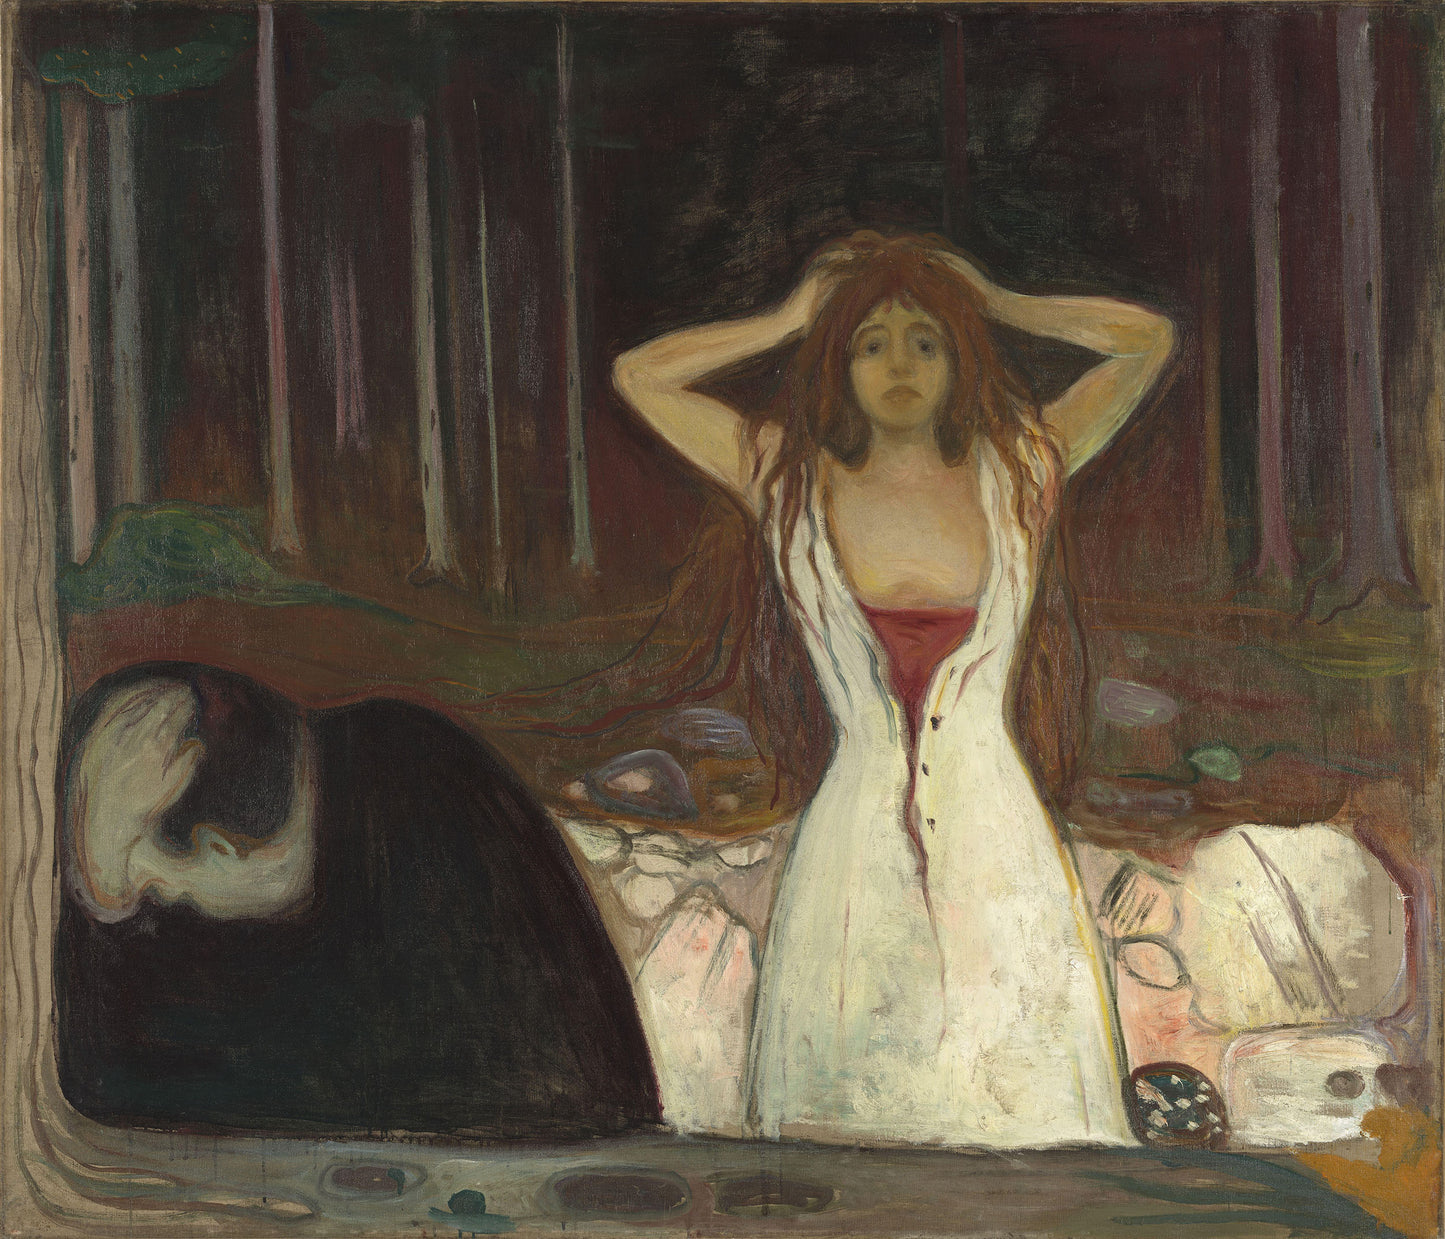 Ashes - A painting by Edvard Munch